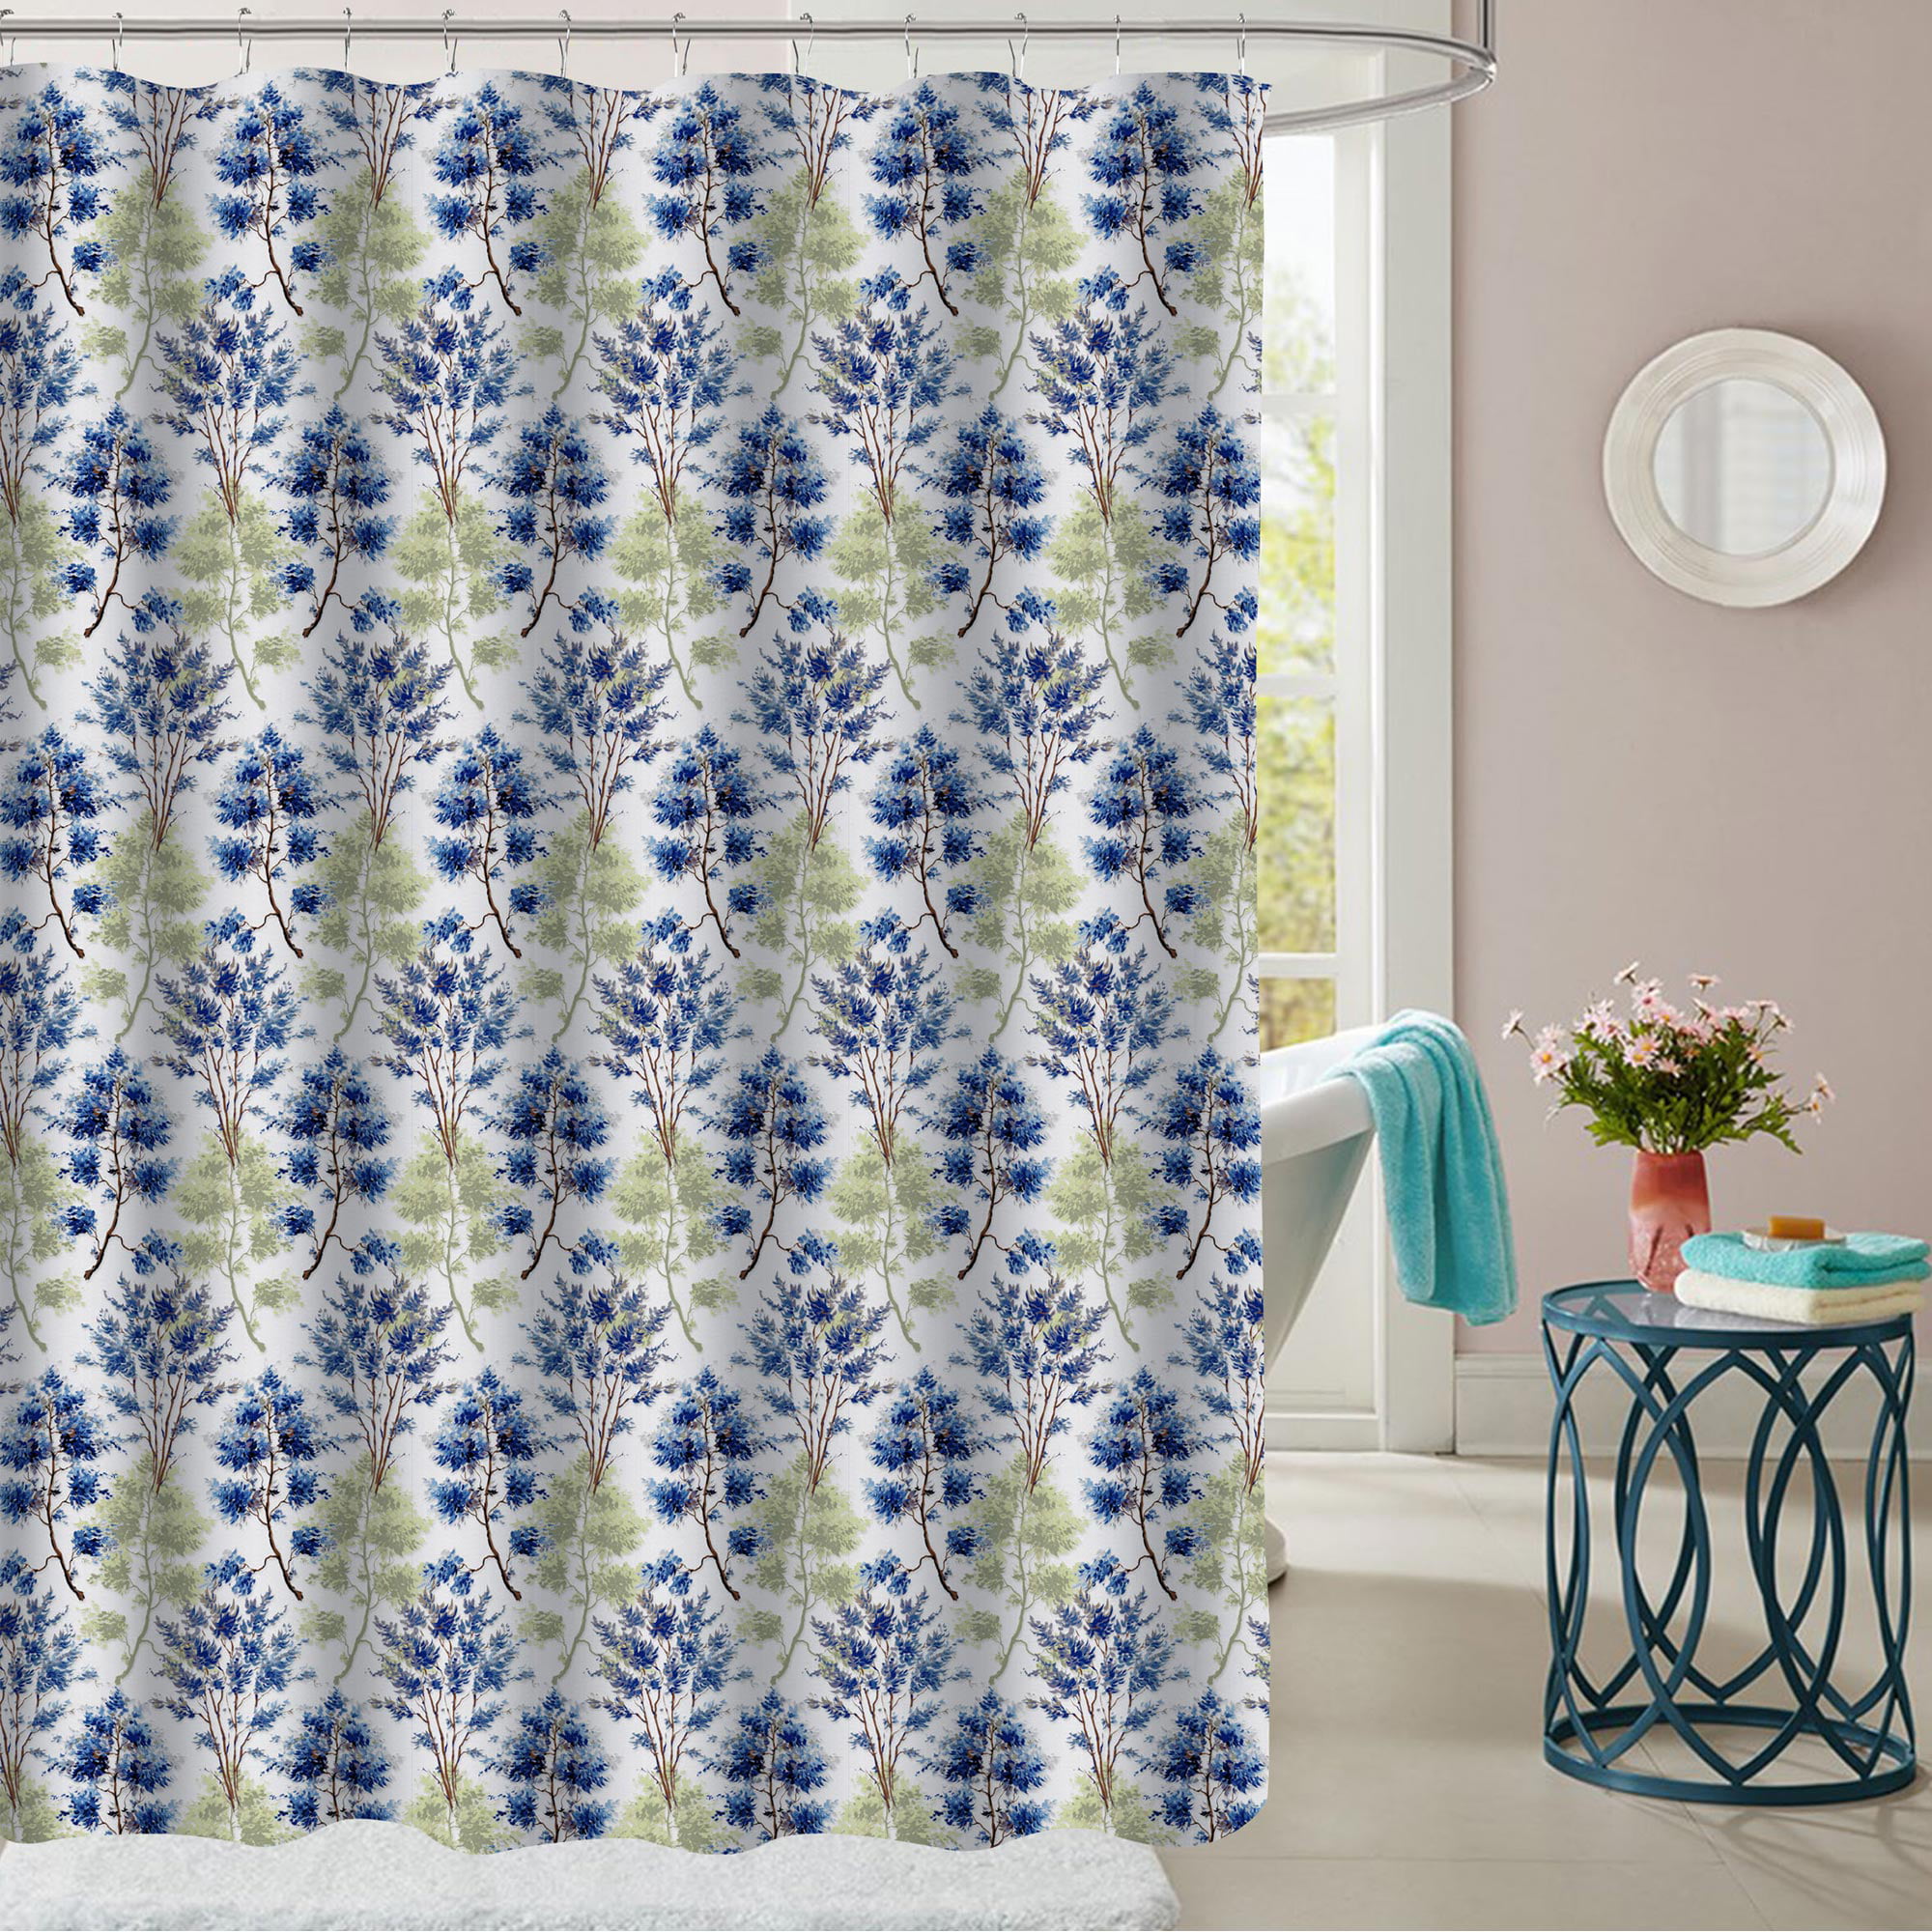  Fabric  Shower  Curtain  72 x 70 Printed Patterns Floral  